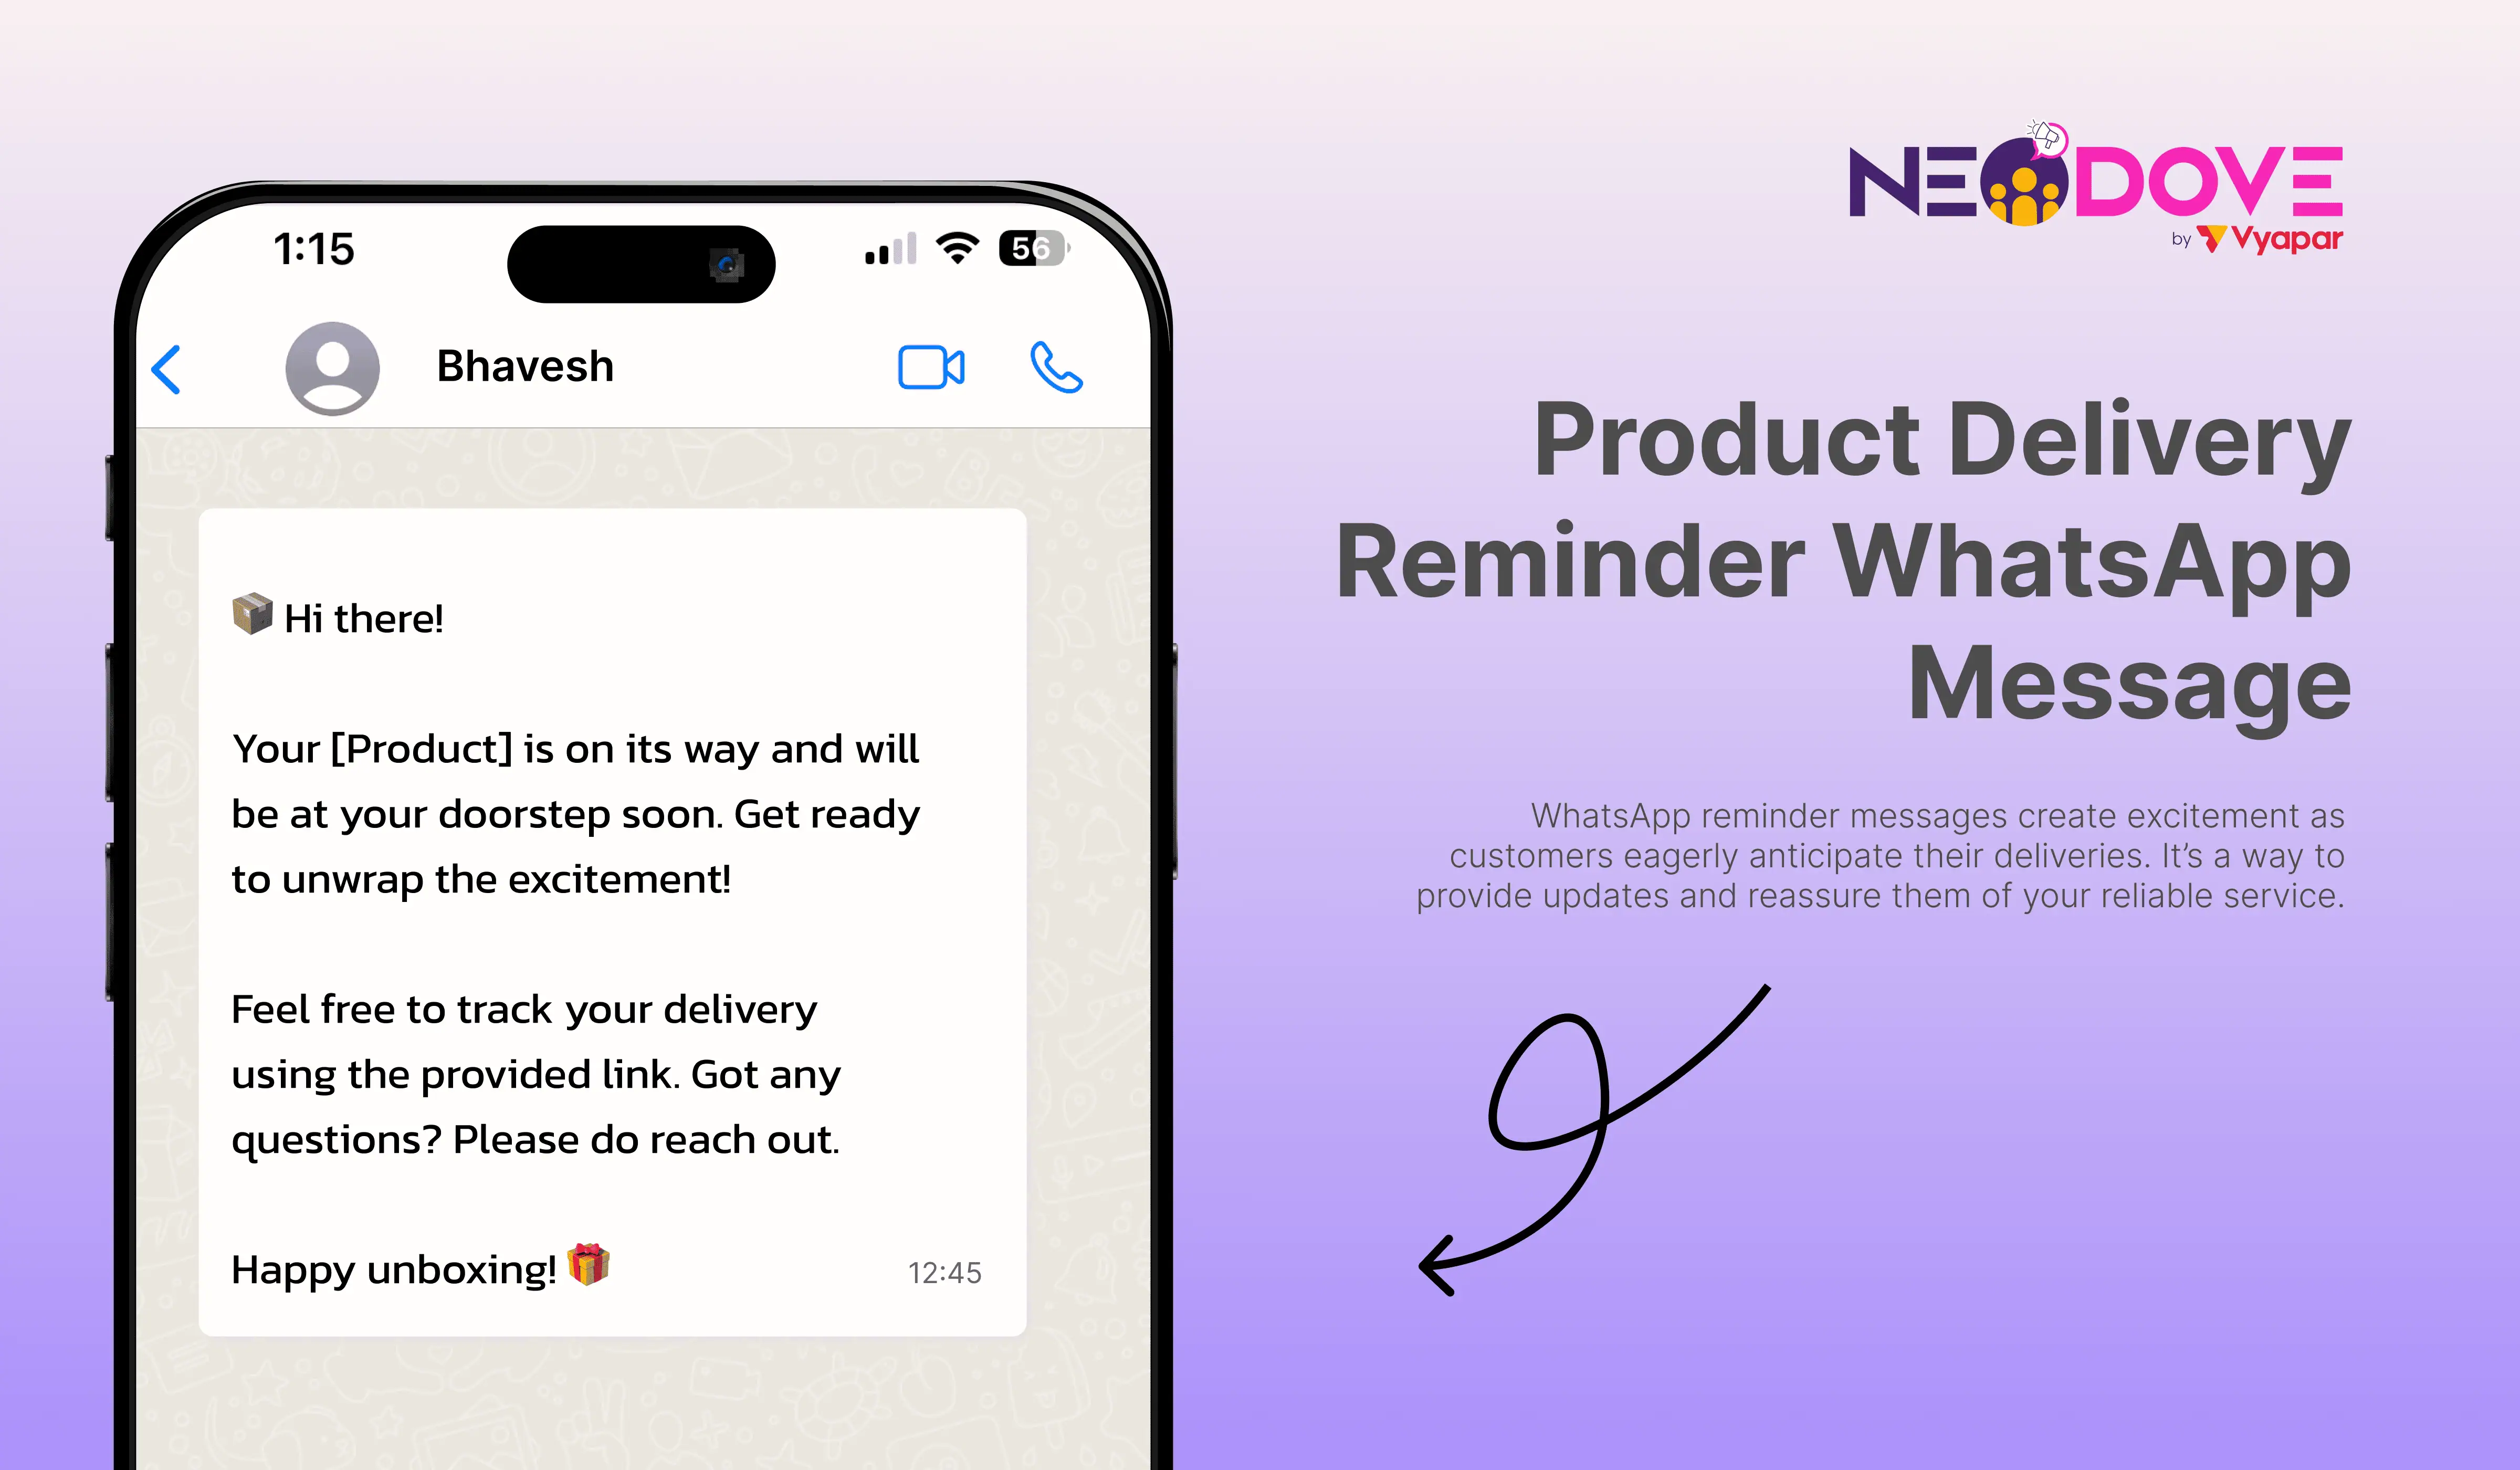 Product delivery reminder WhatsApp Messsage - NeoDove 